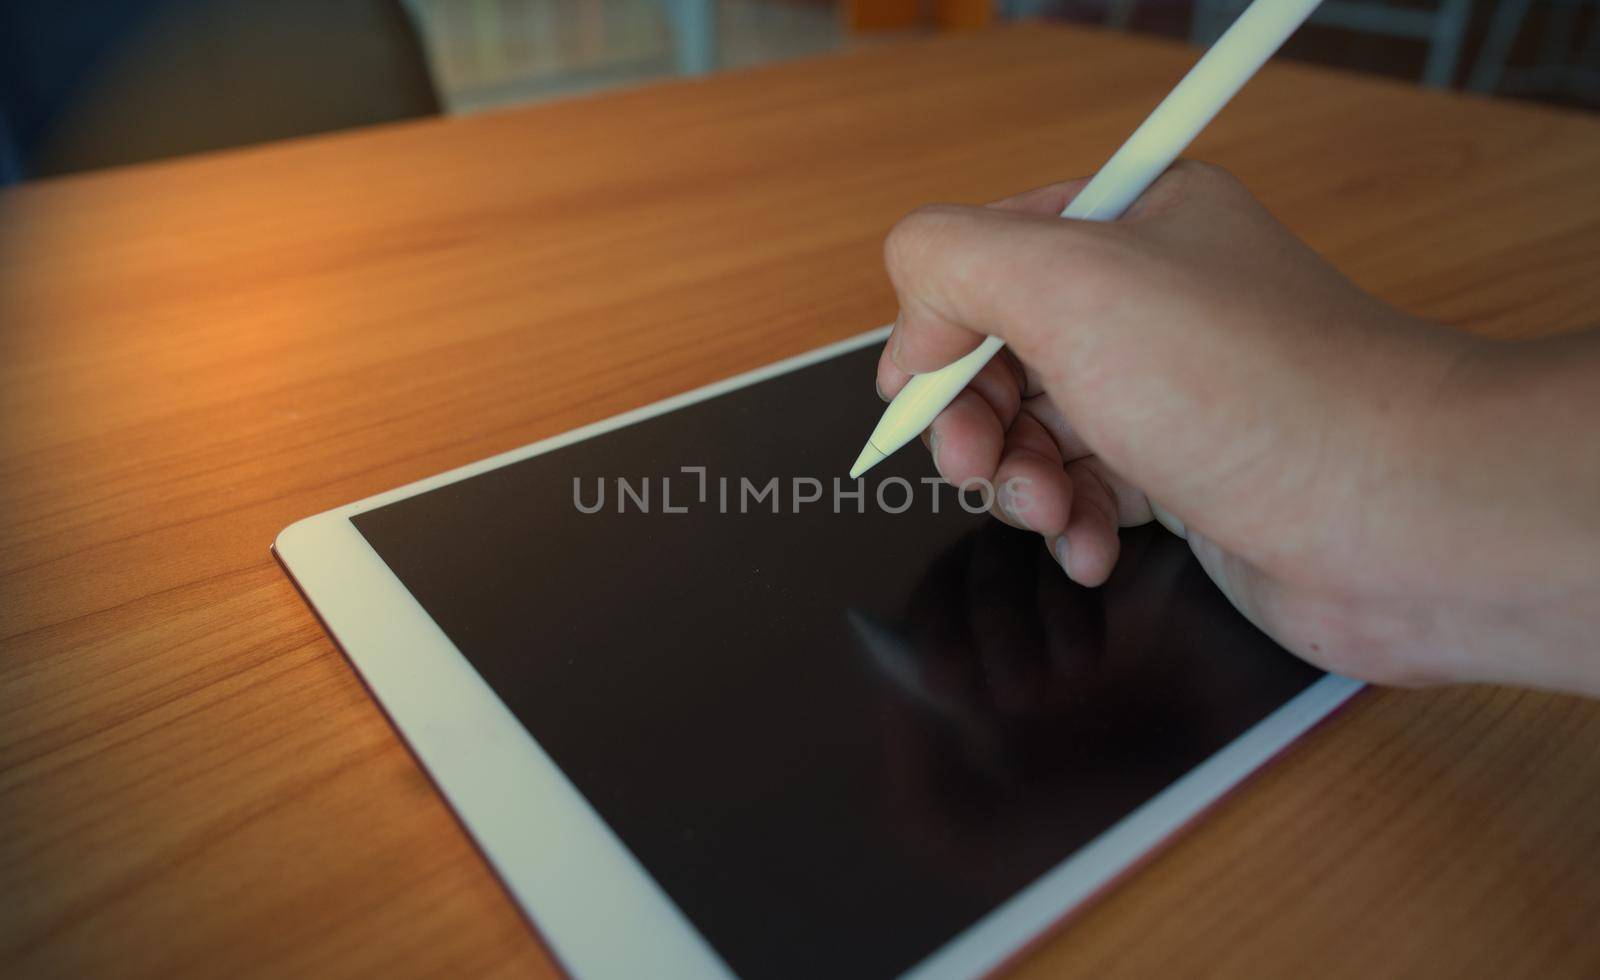 A man writing on the tablet with an electronic pencil on a wooden table